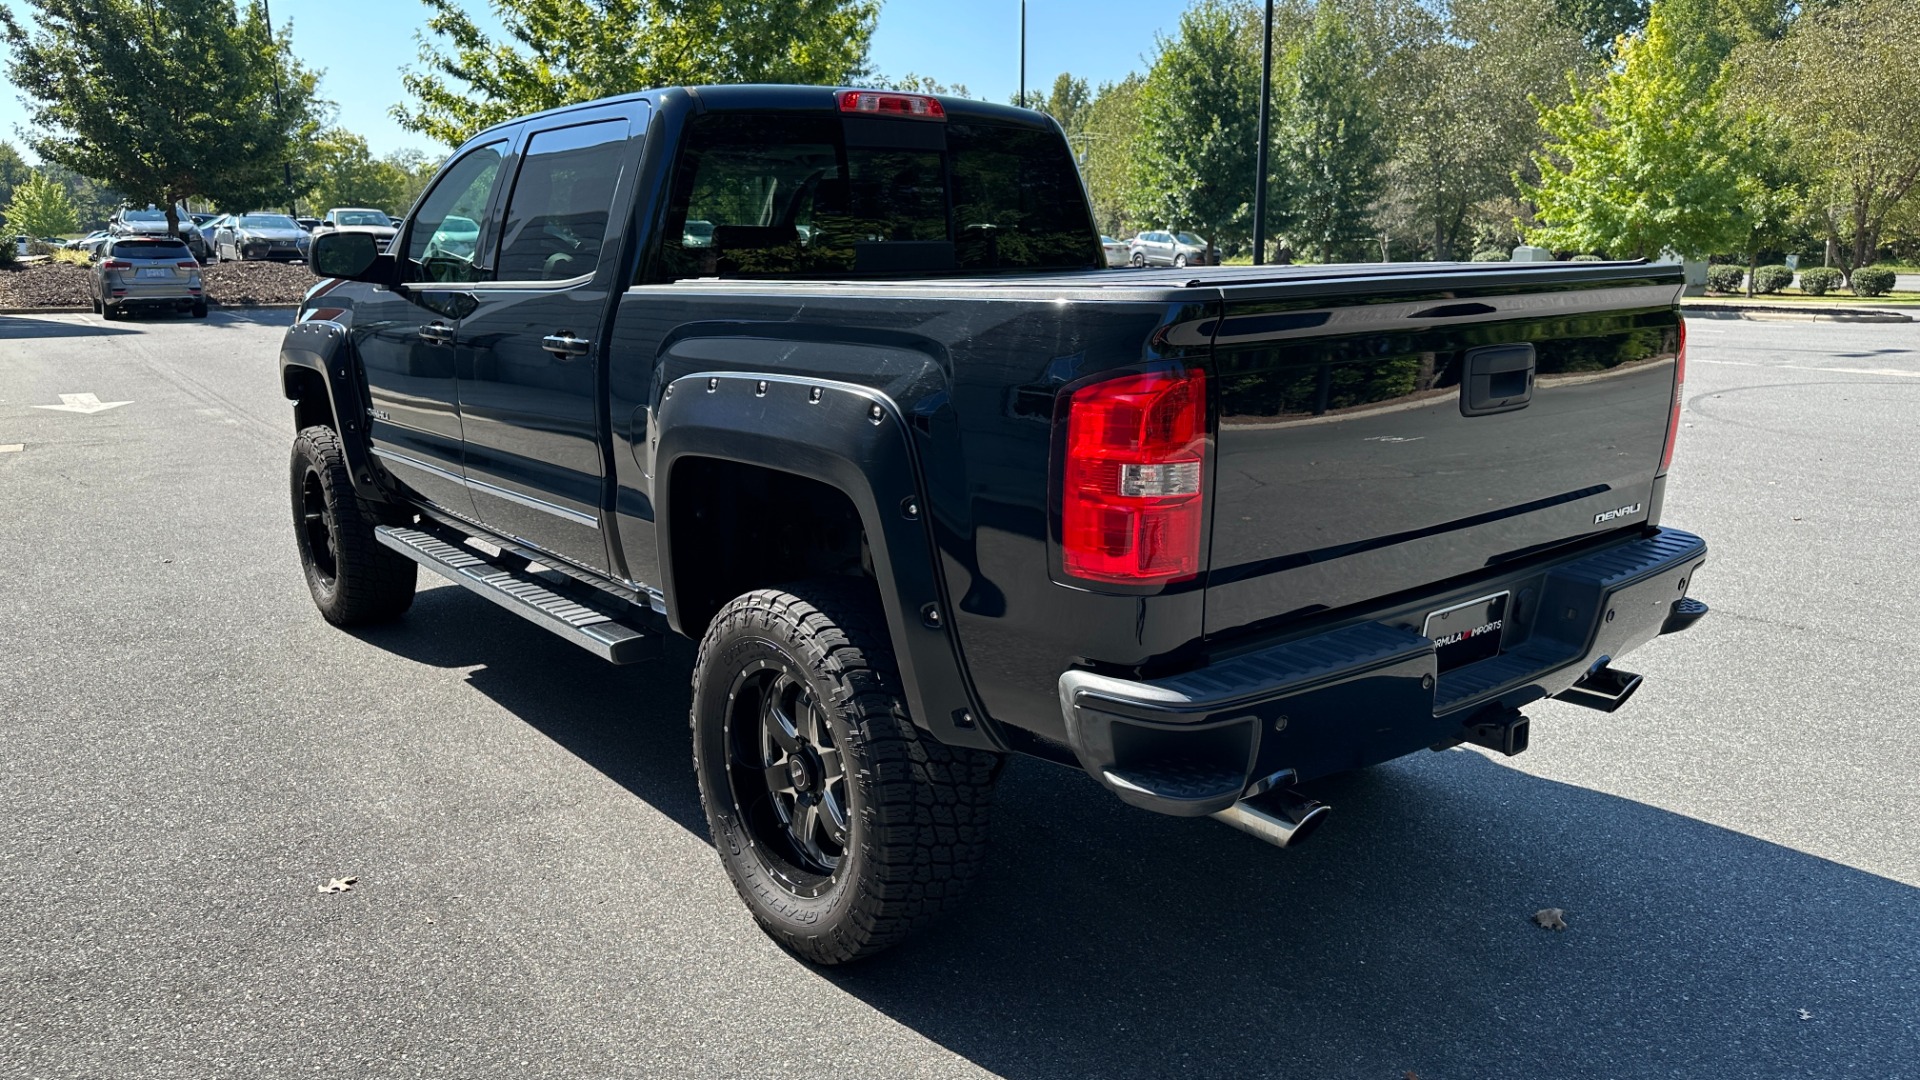 Used 2015 GMC Sierra 1500 DENALI / LIFT KIT / UPGRADED WHEELS / SUNROOF / 6.2L V8 for sale $33,995 at Formula Imports in Charlotte NC 28227 4